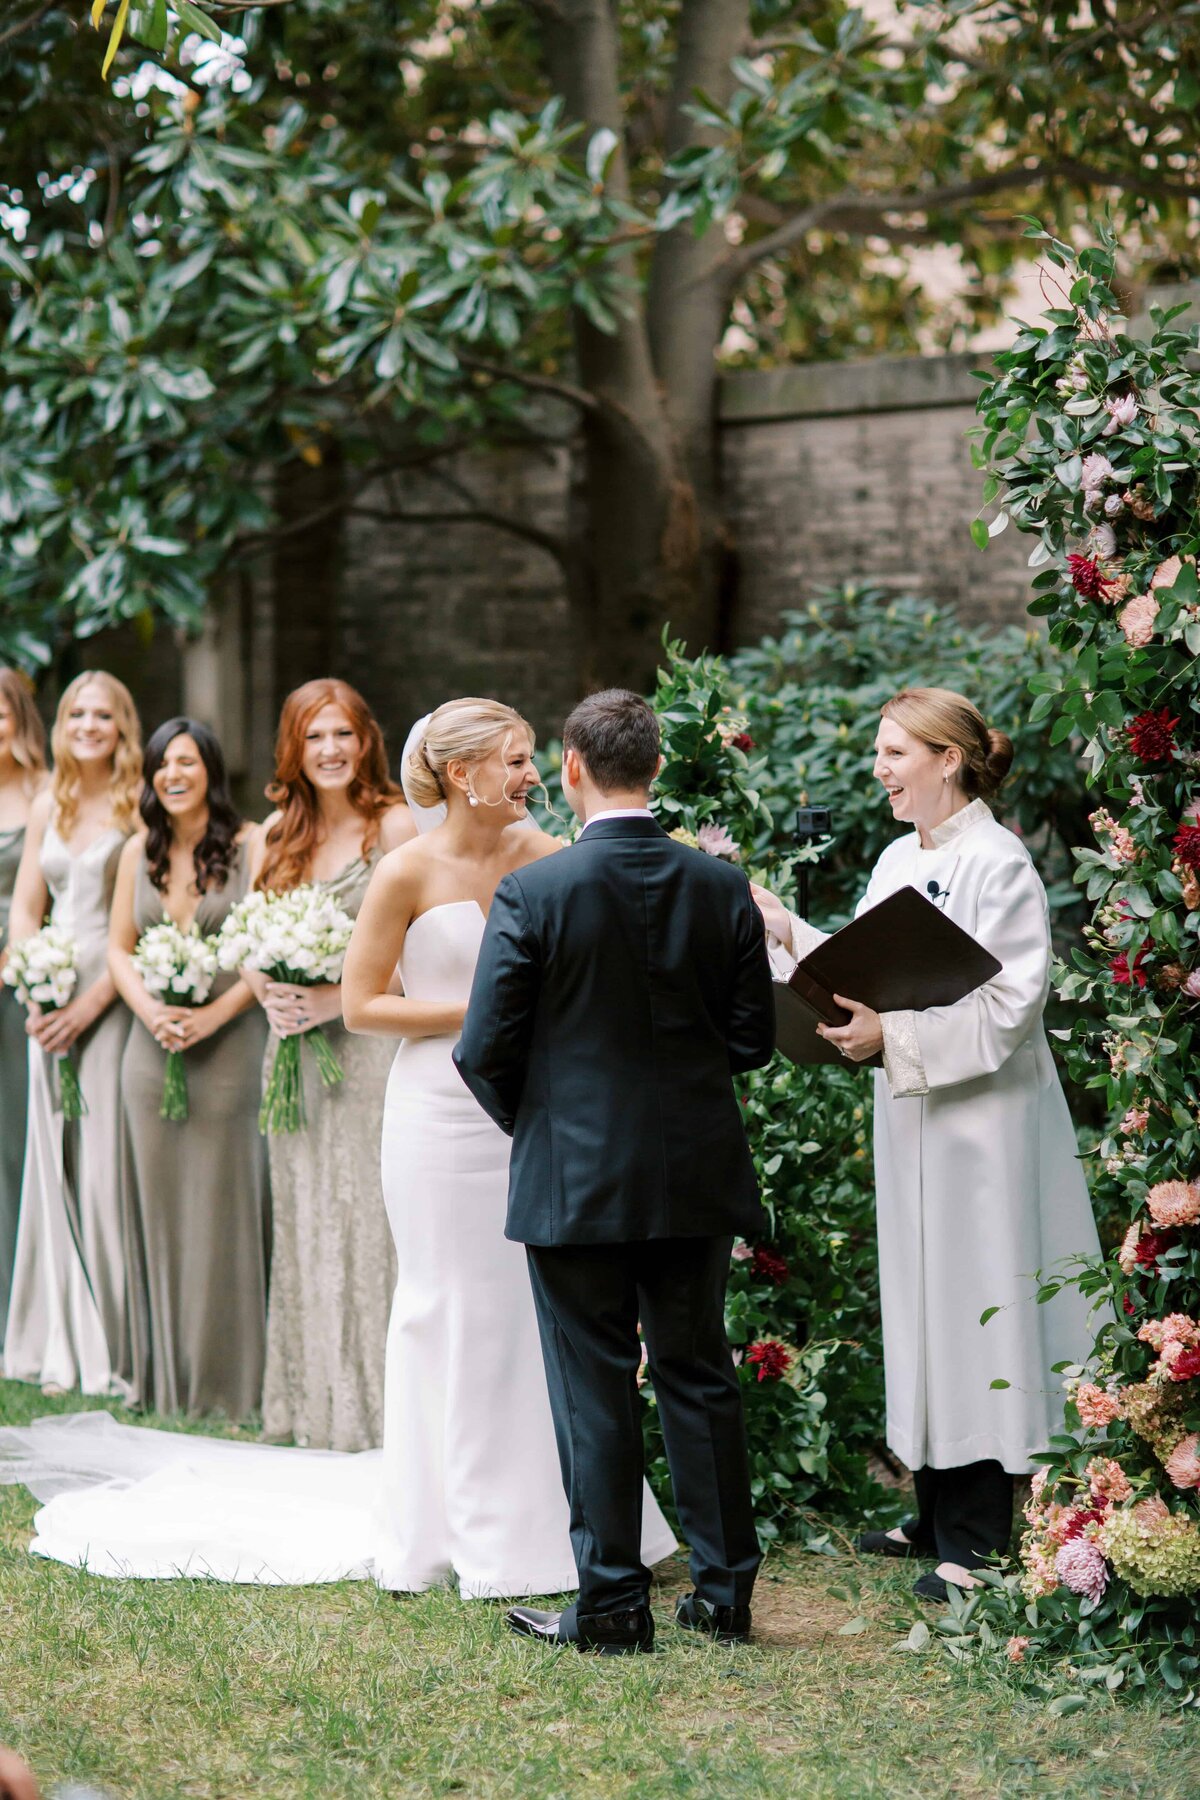 A fair haired bride is laughing while holding the hands of a handsome groom in a black tuxedo as they get married with the officiant beside them at the Larz Anderson House.